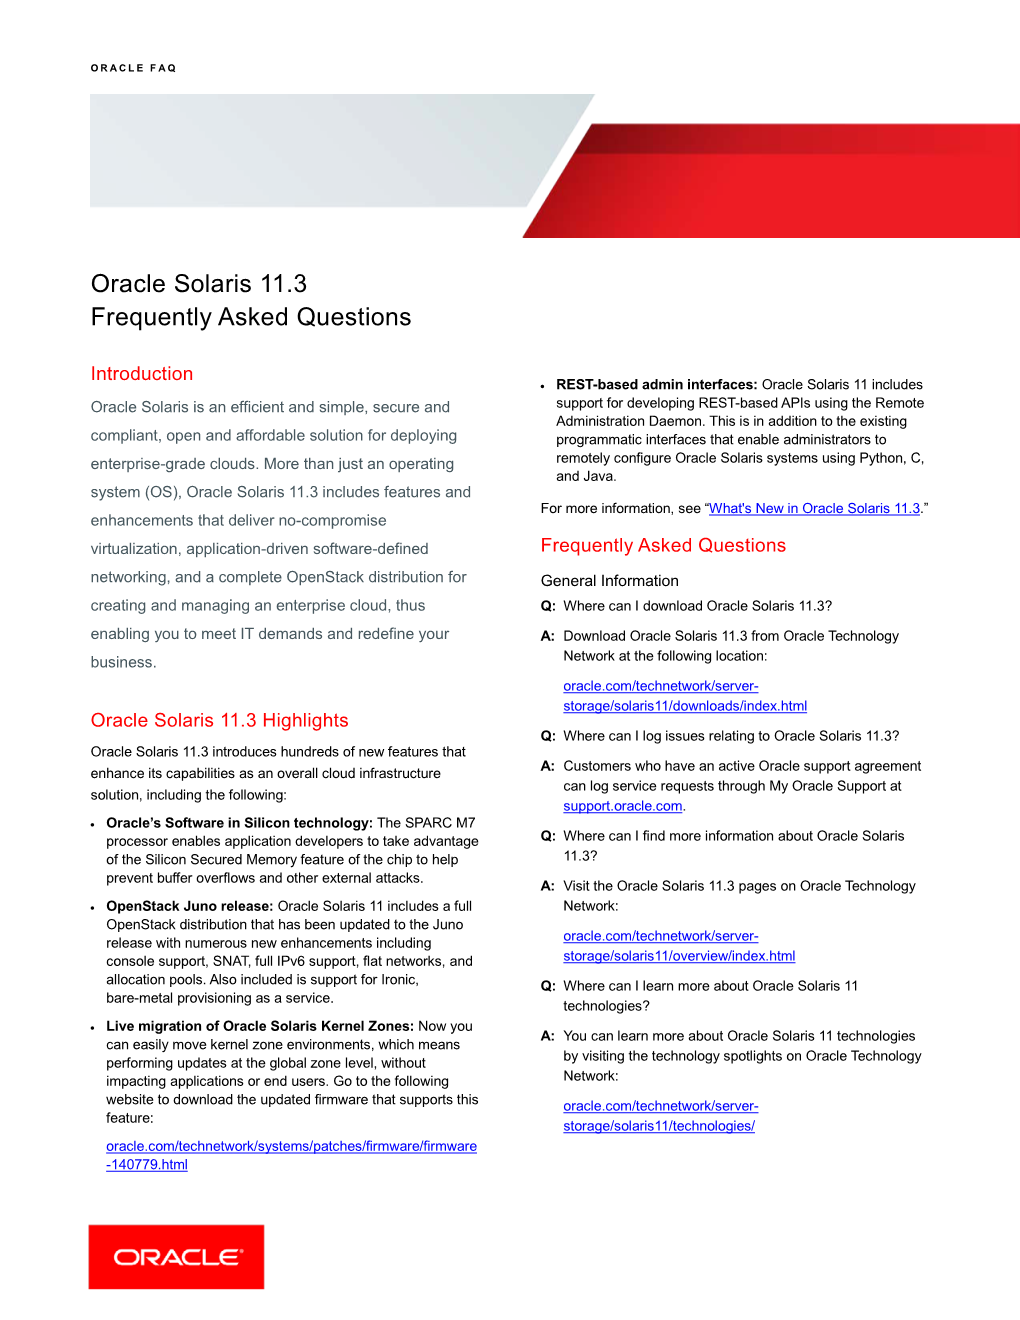 Oracle Solaris 11.3 Frequently Asked Questions